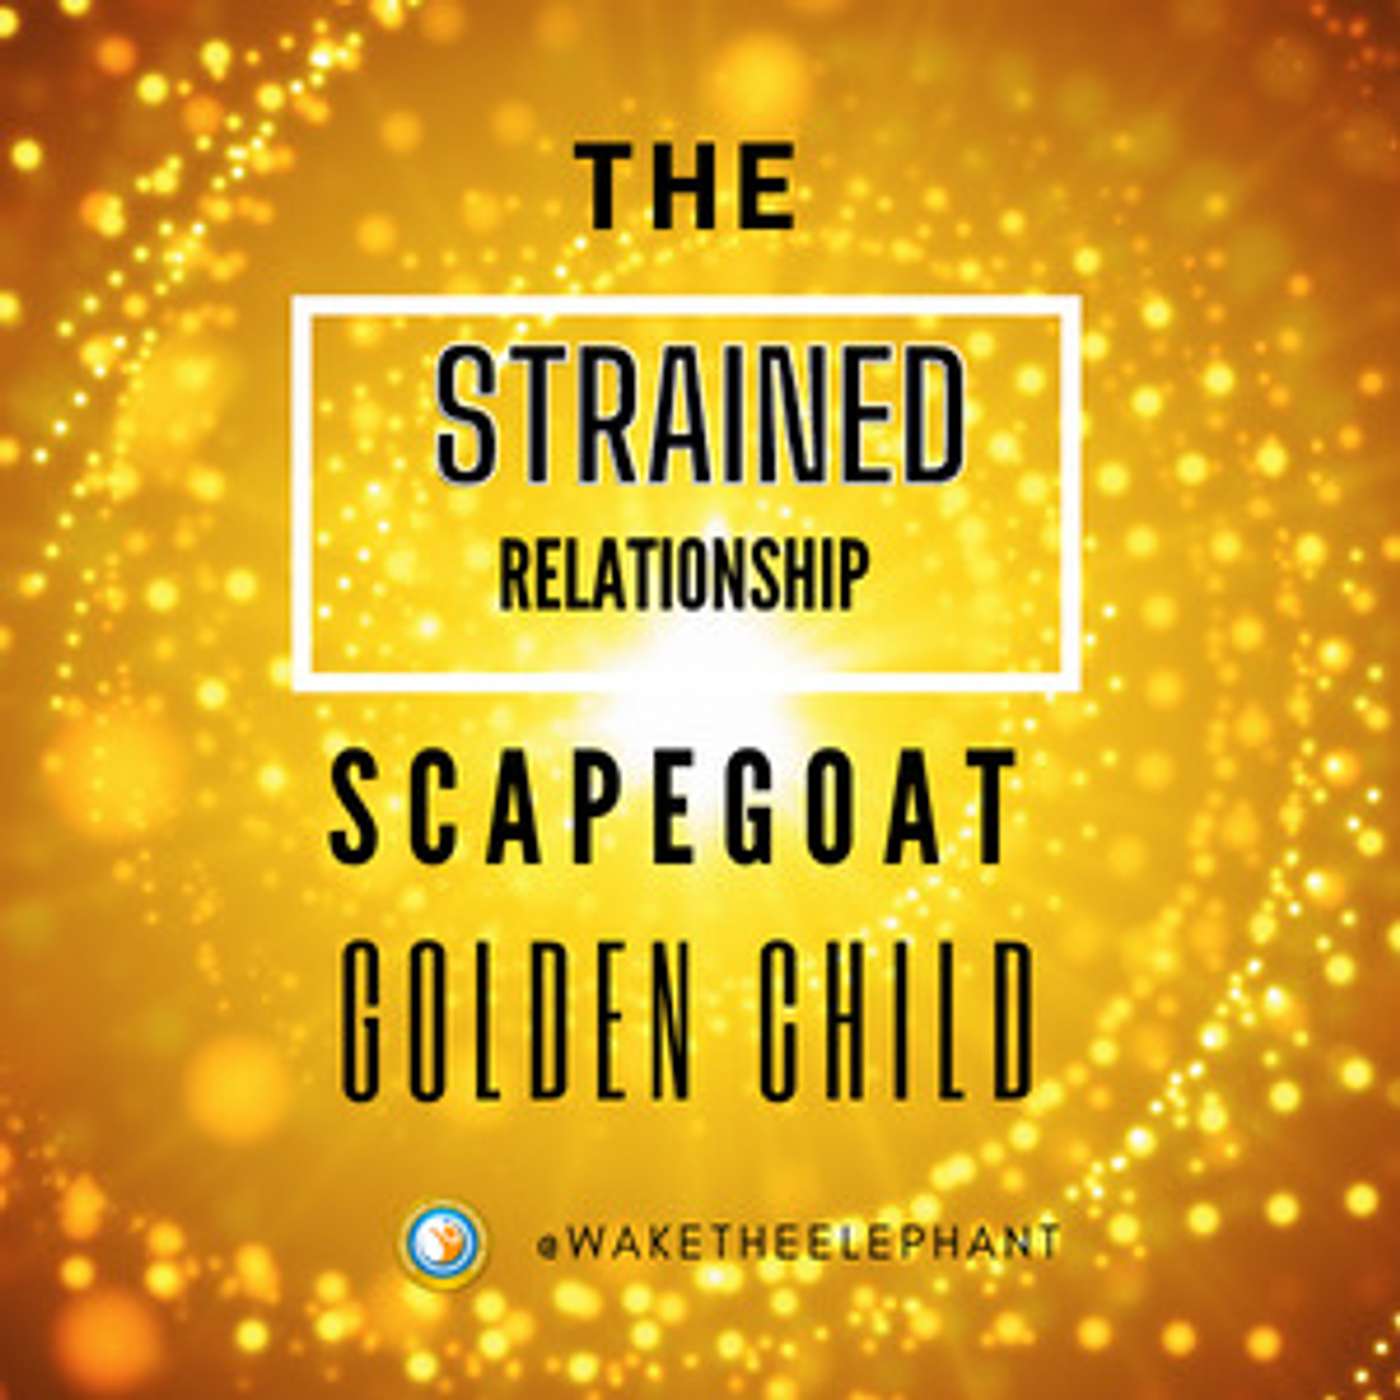 The Strained Golden Child and Scapegoat Relationship